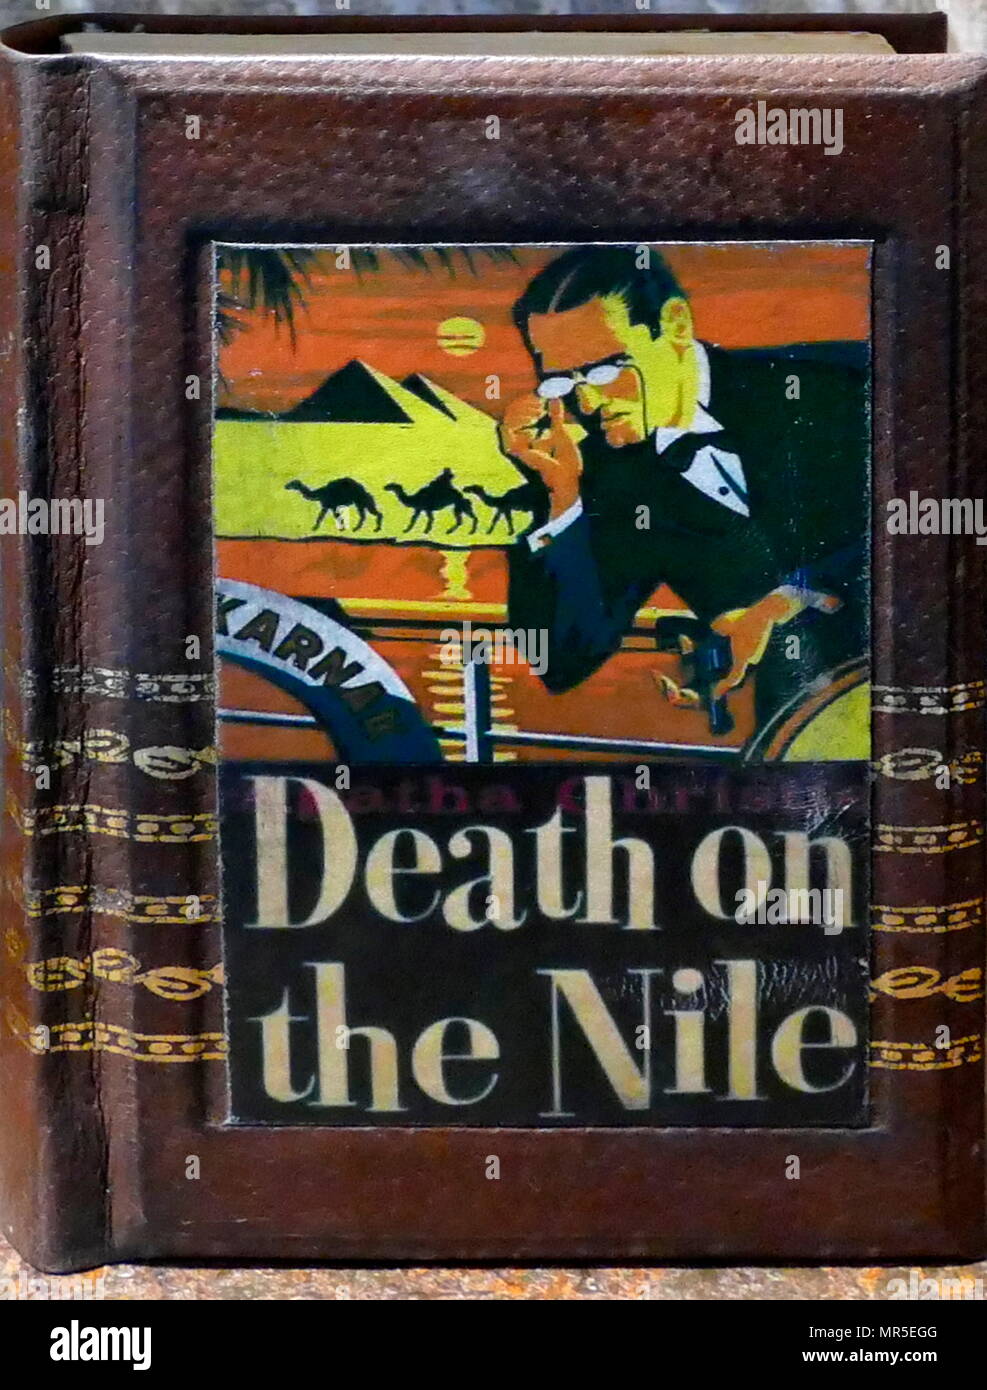 Cover of the book, 'Death on the Nile' a detective fiction by Agatha Christie and first published in the UK by the Collins Crime Club on 1 November 1937 Stock Photo